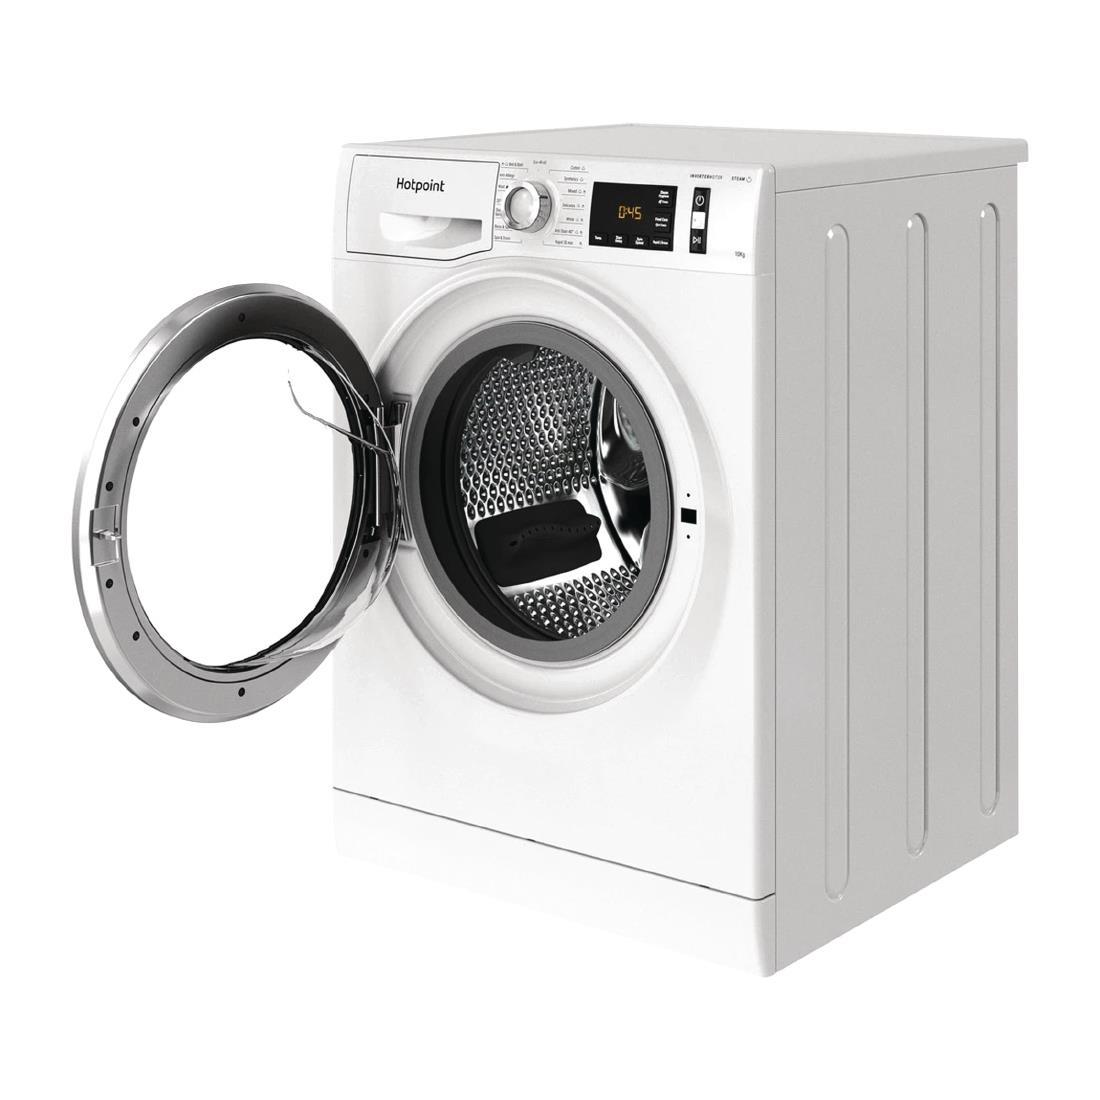 Hotpoint ActiveCare Washing Machine NM11 1045 WC A - DC974  - 3